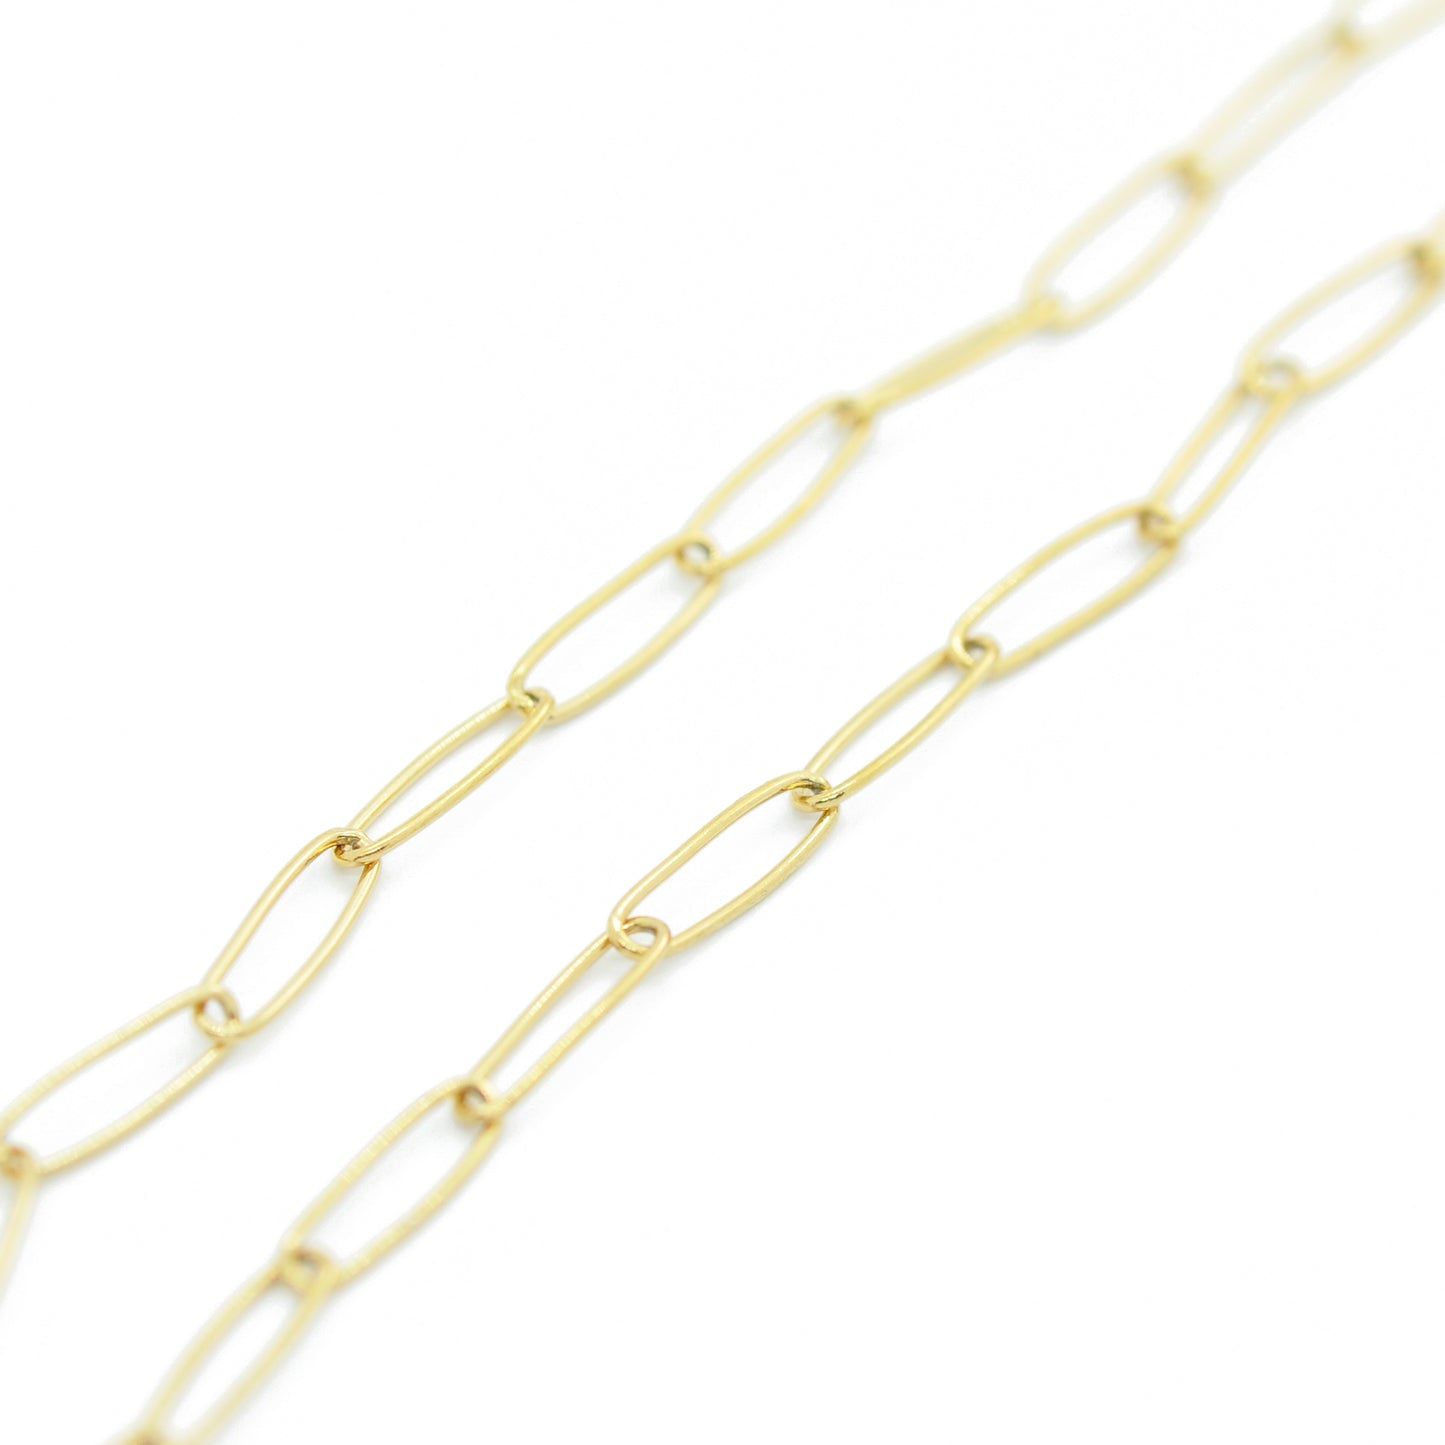 Delicate paper clip stainless steel chain / gold plated / 9 x 2.6 mm